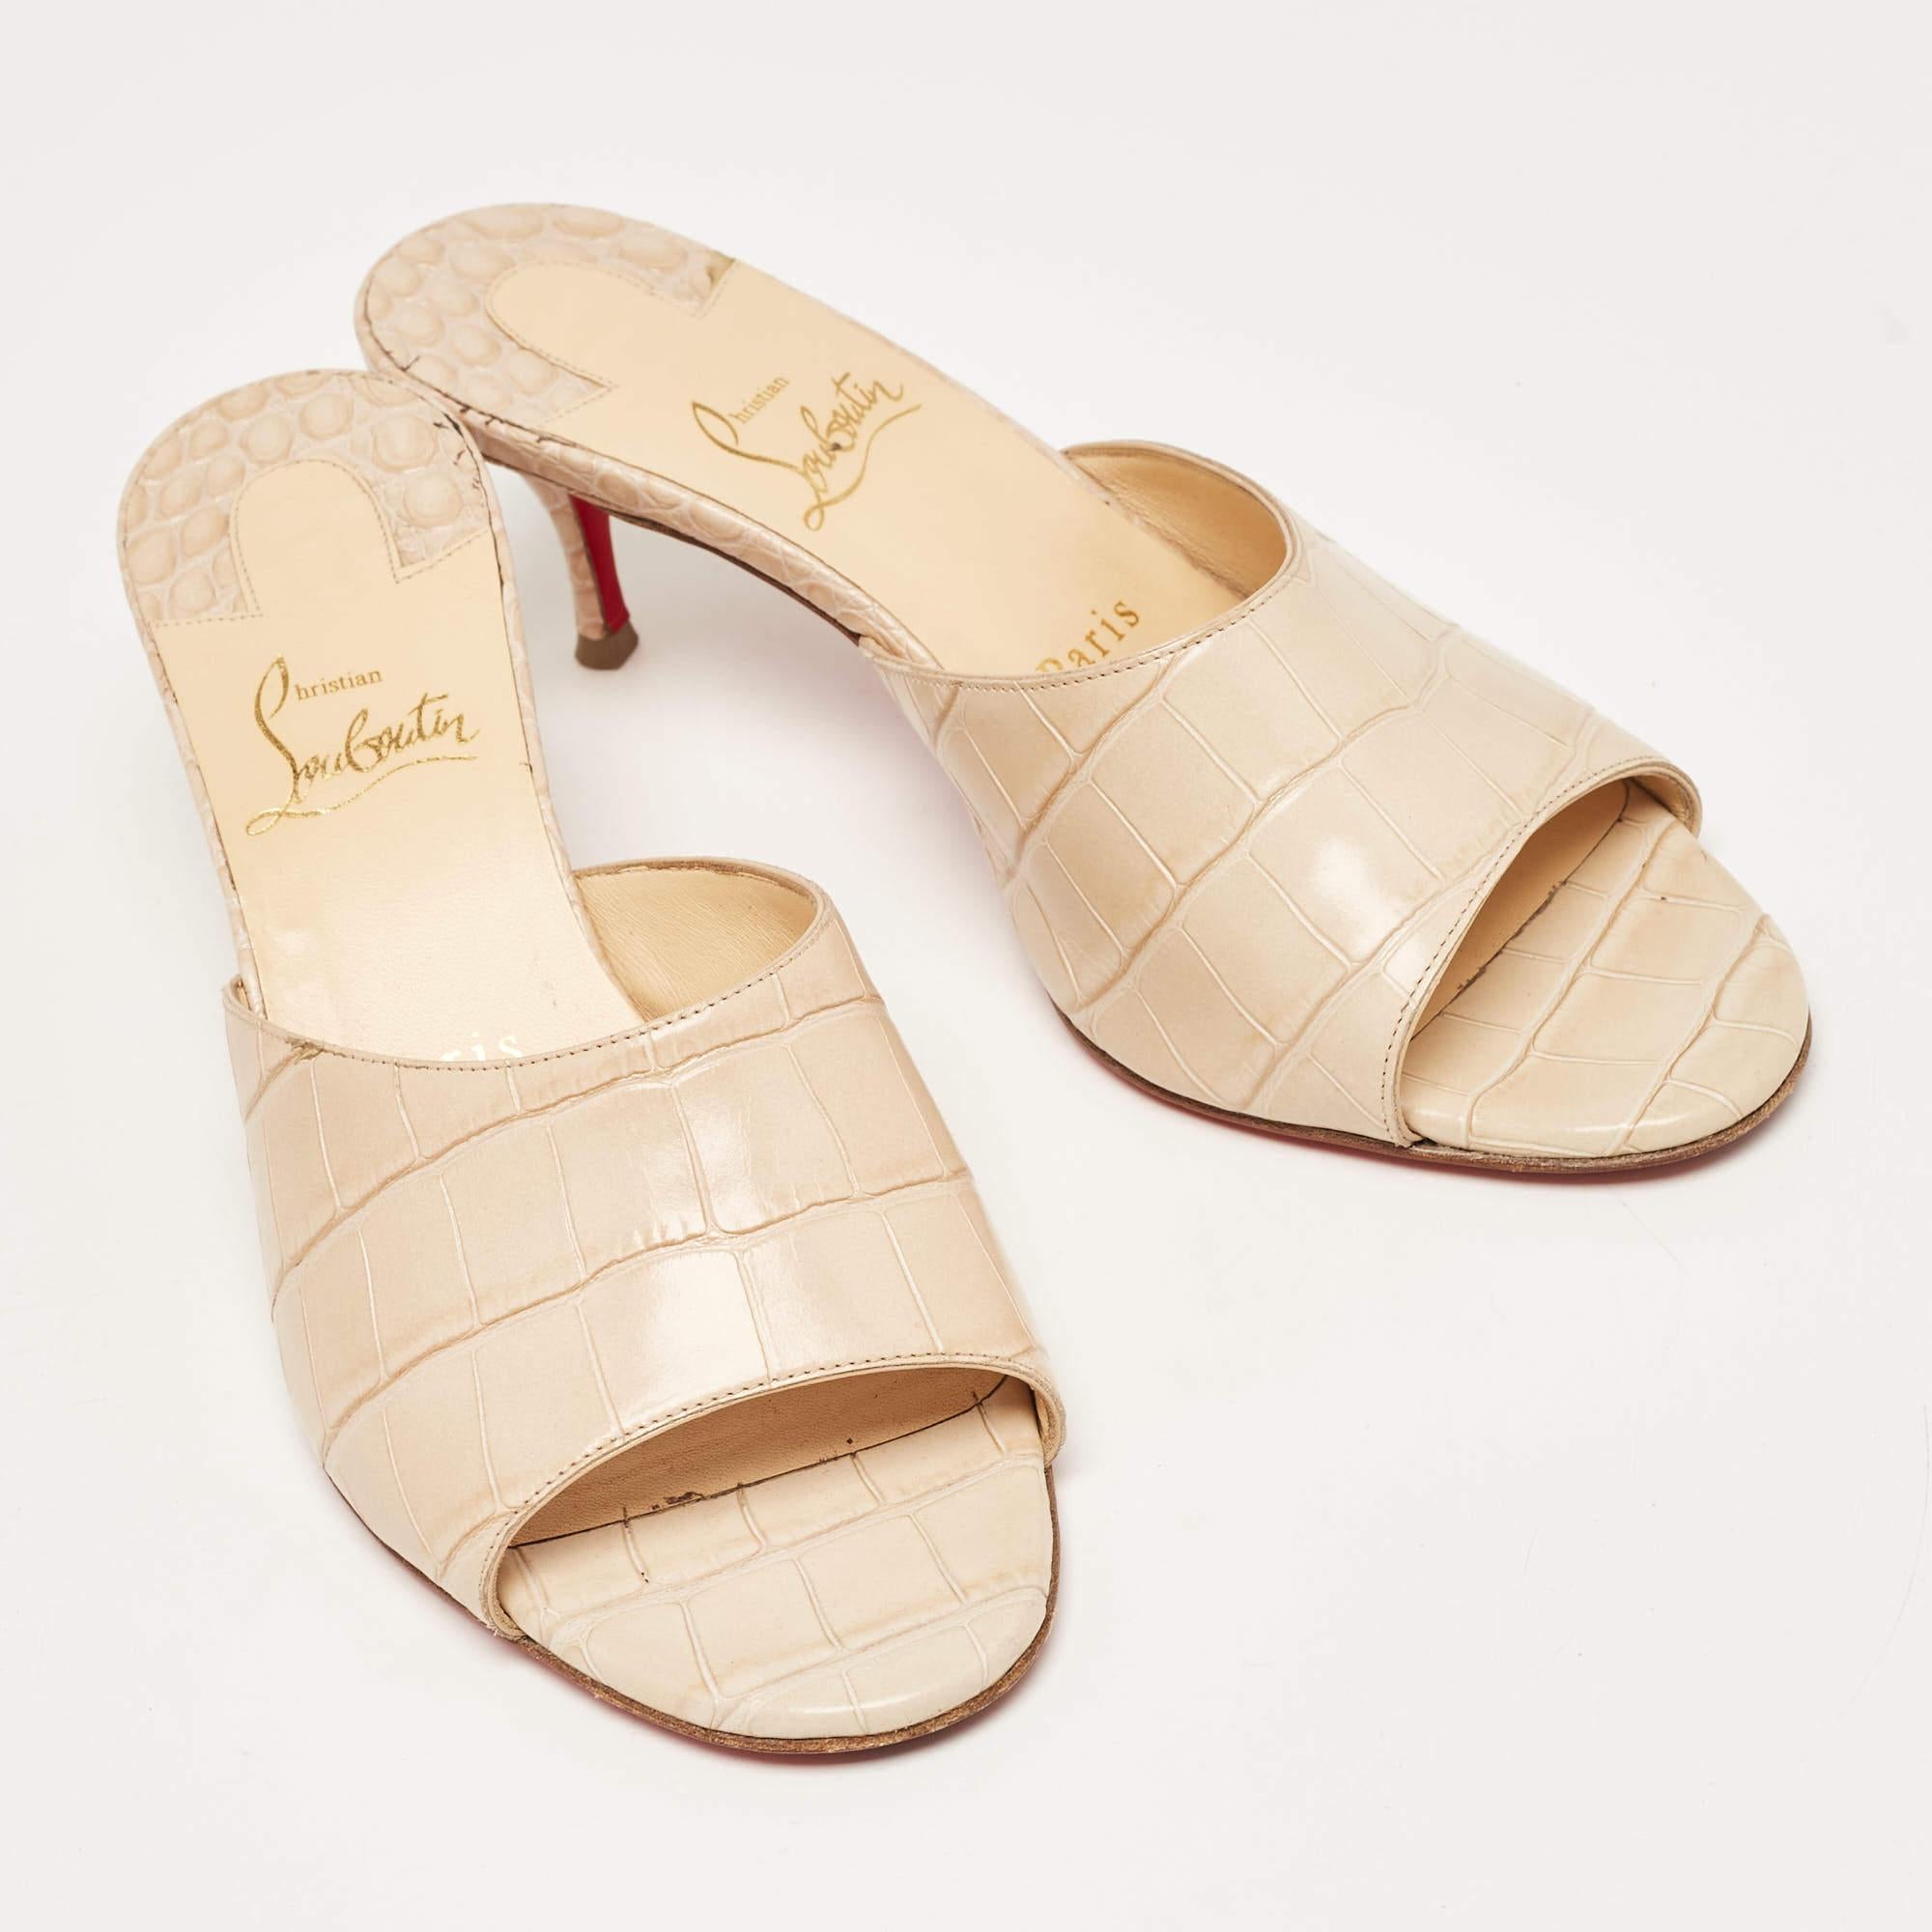 Christian Louboutin Beige Croc Embossed Leather East Slide Sandals Size 37 In Good Condition For Sale In Dubai, Al Qouz 2